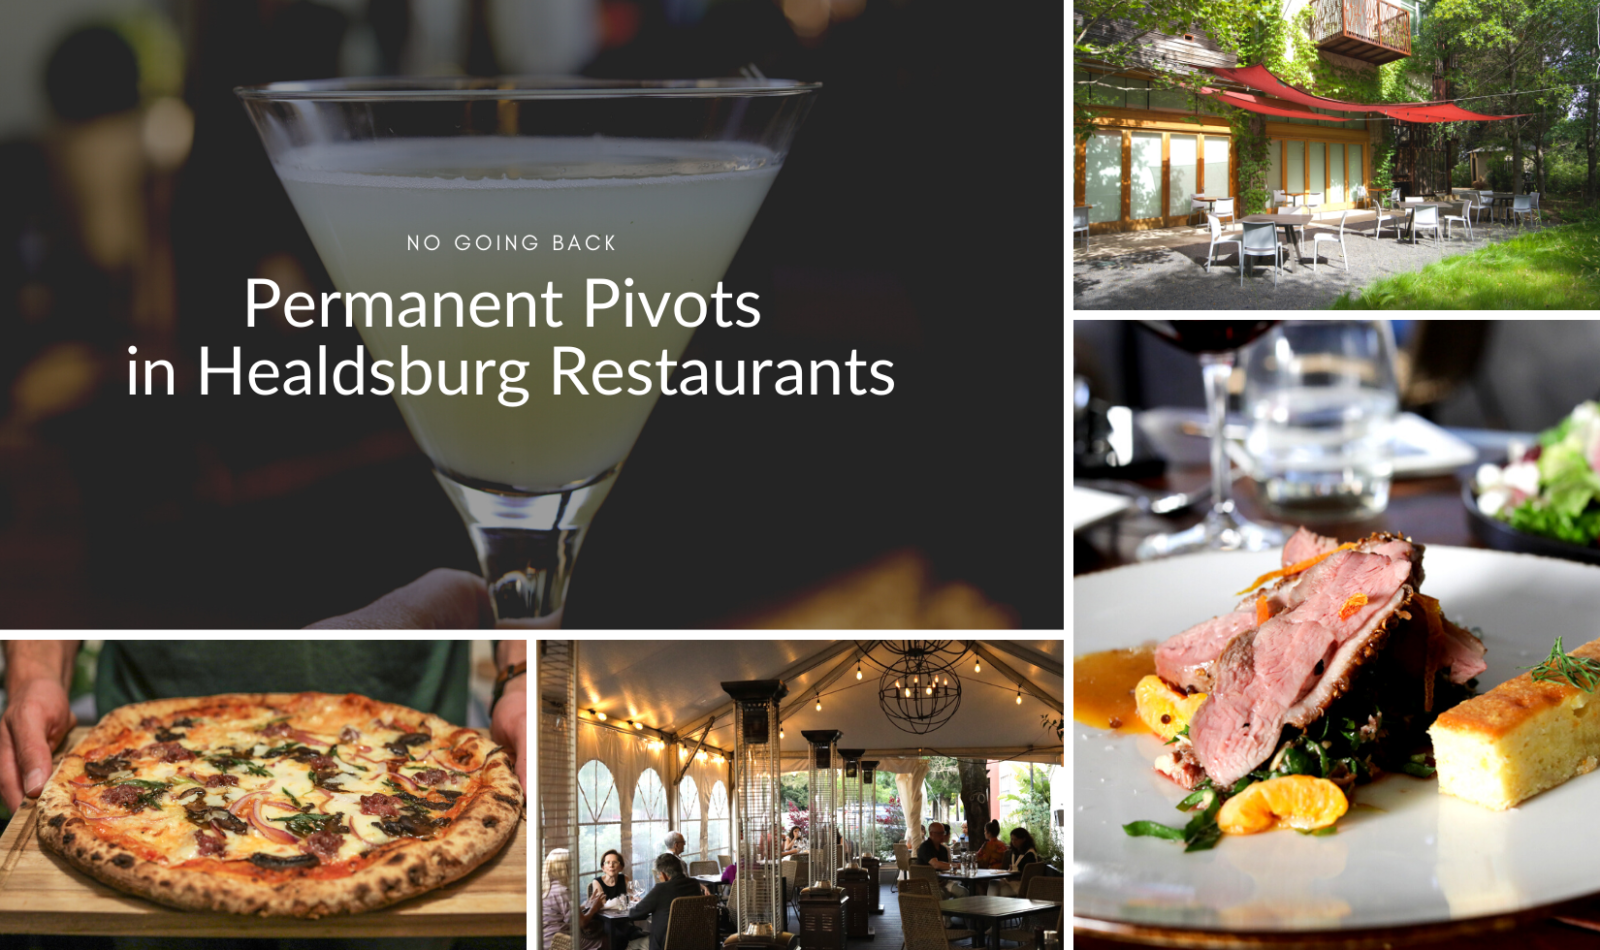 photo collage of restaurant patios, pizza and duck breast